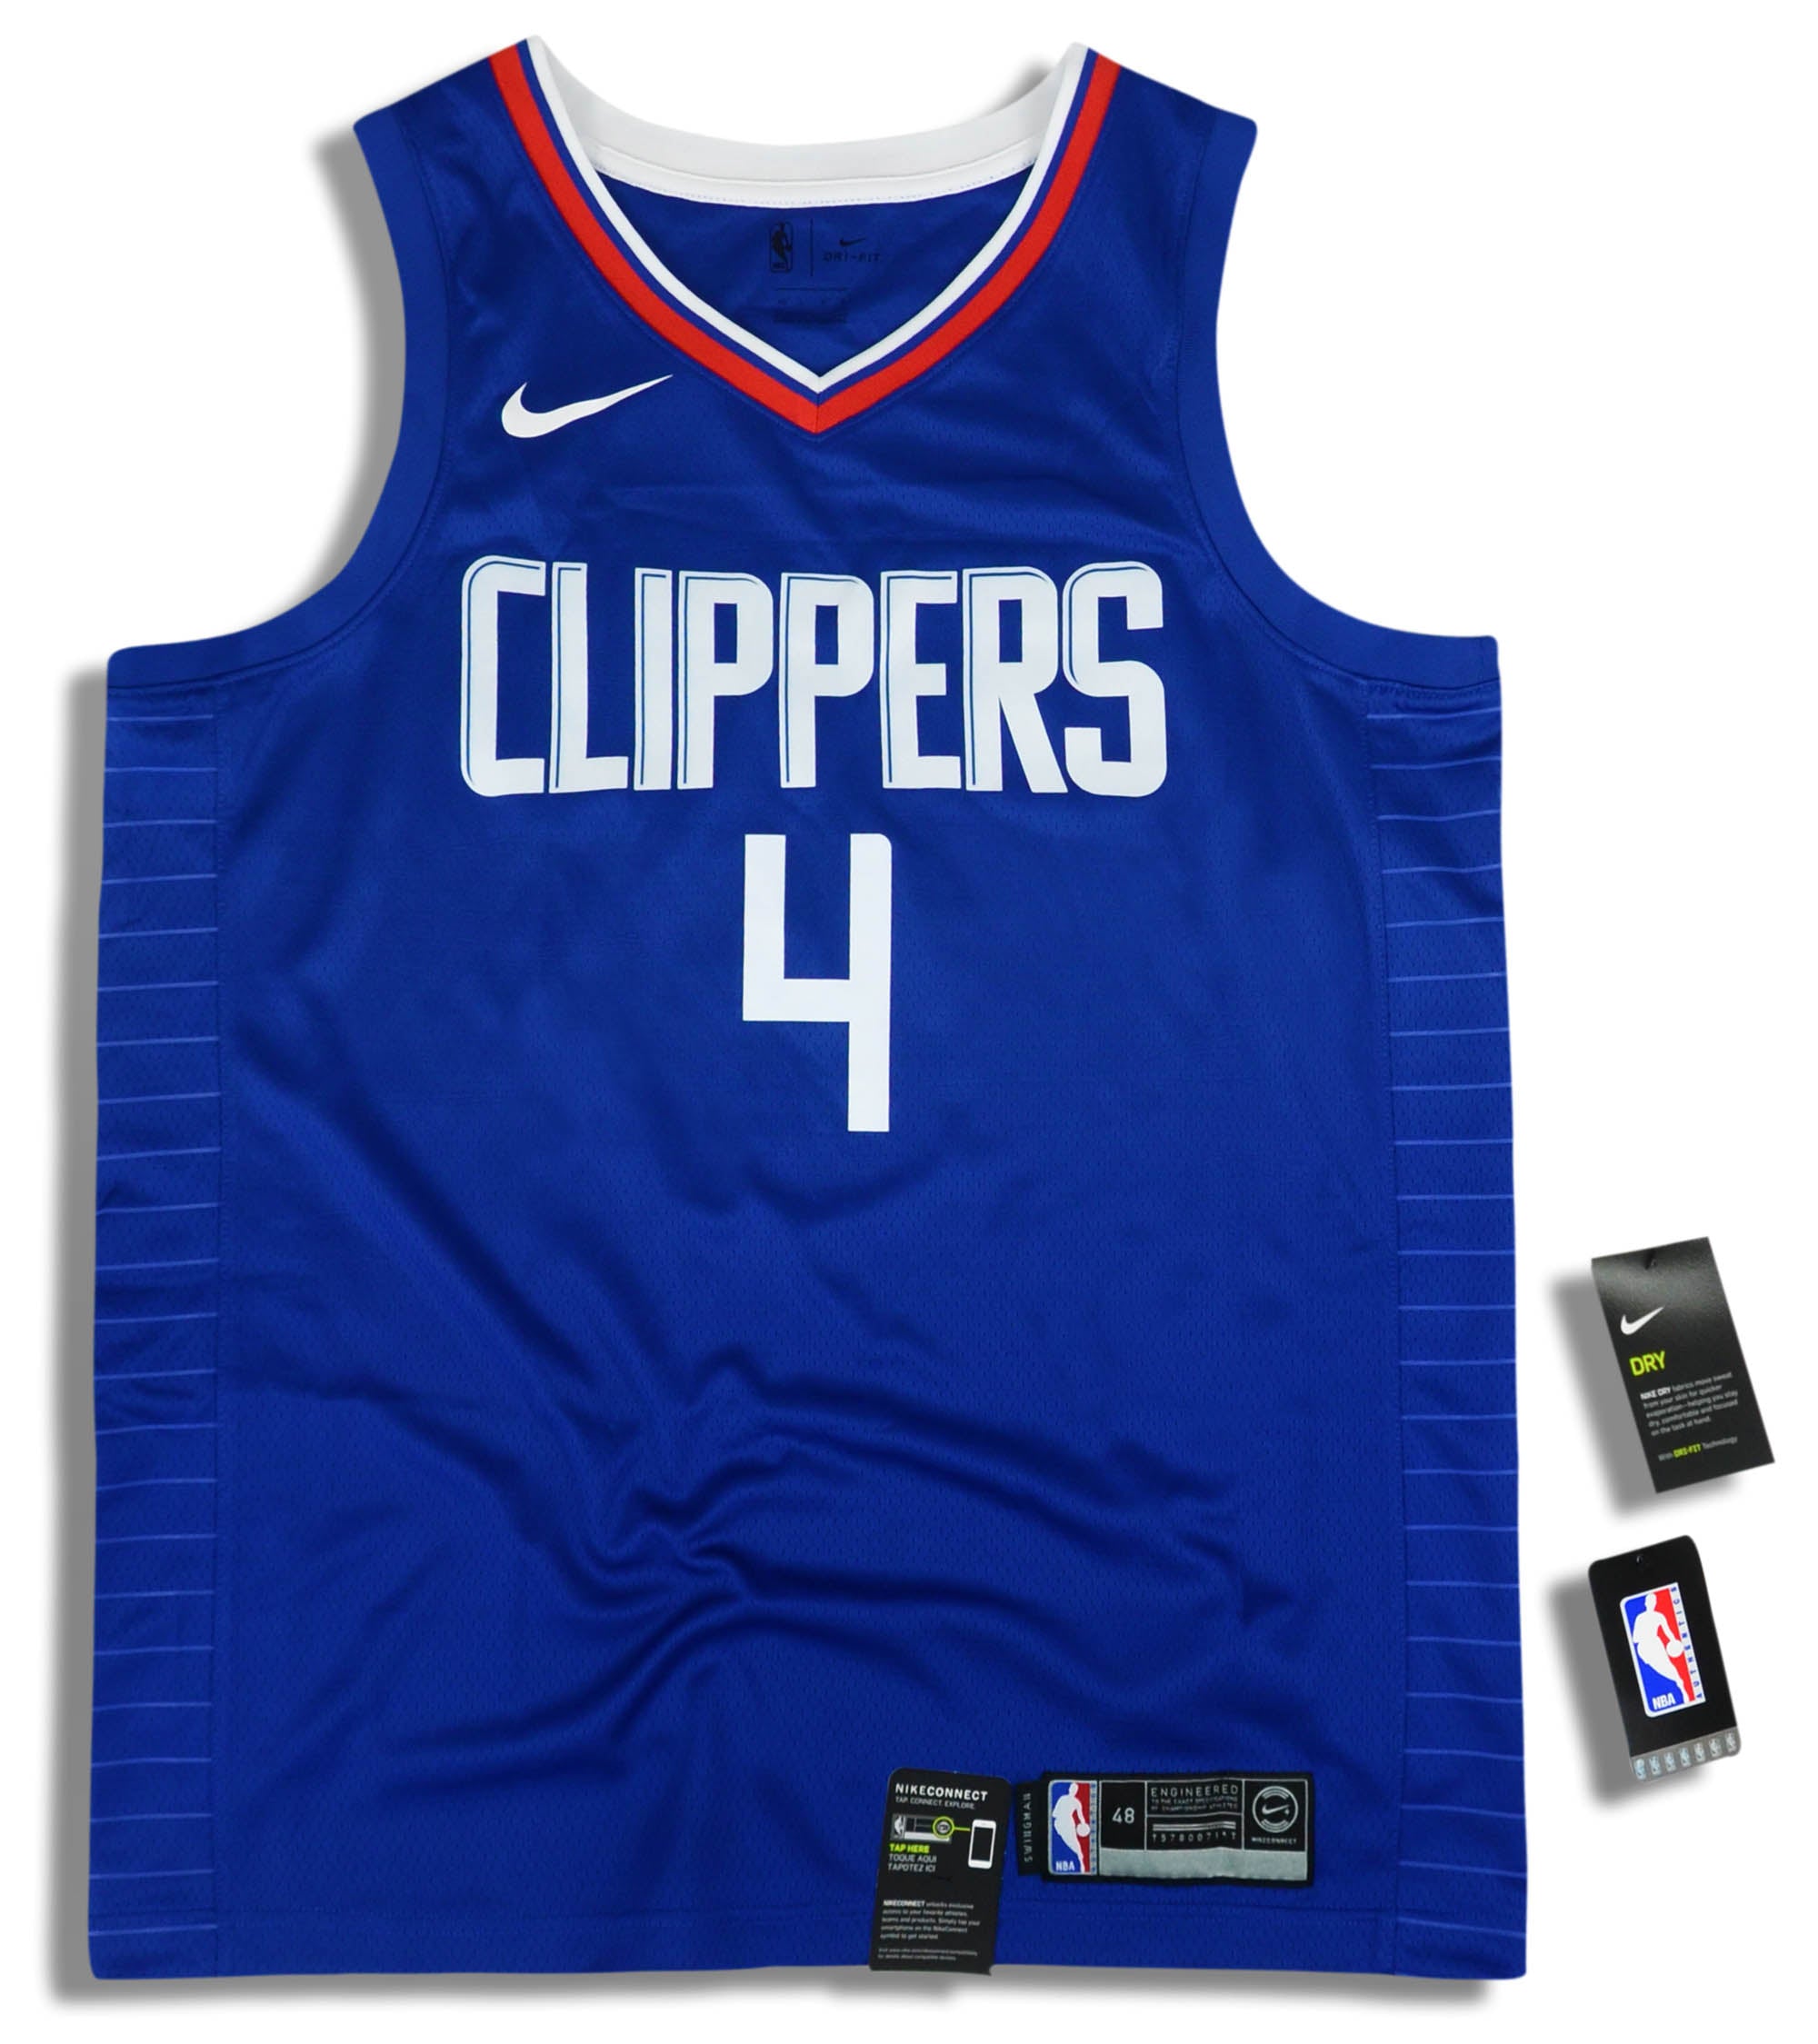 Anyone know if one of these (clippers 2018-19 city jersey) is on